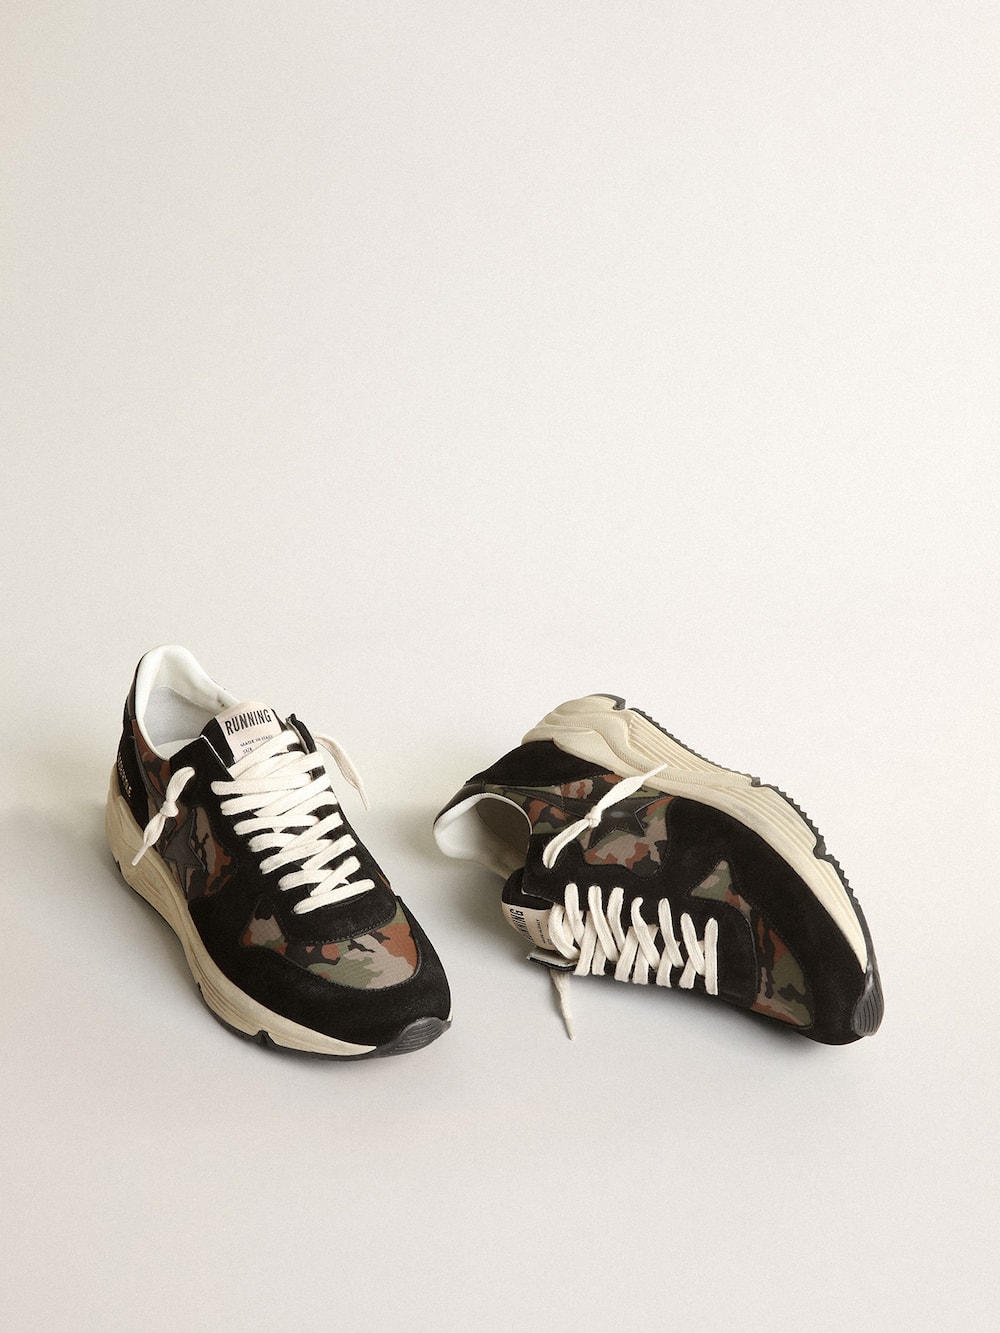 Golden Goose - Running Sole Uomo in nylon ripstop con stampa camouflage  in 